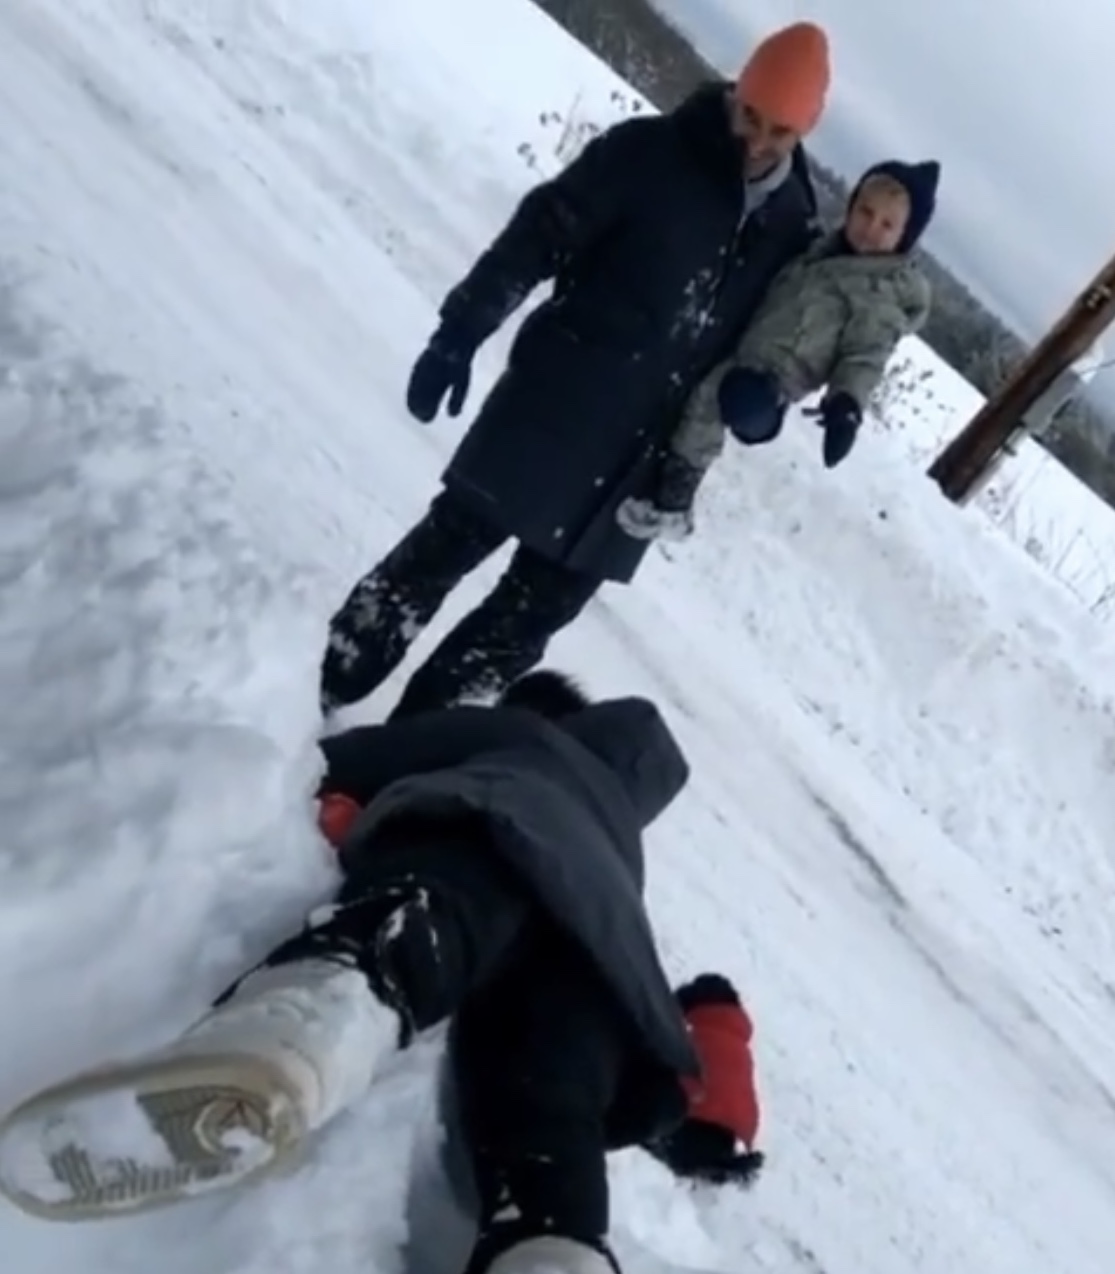 Amy Schumer Stuck In Snow While Husband Tries To Help